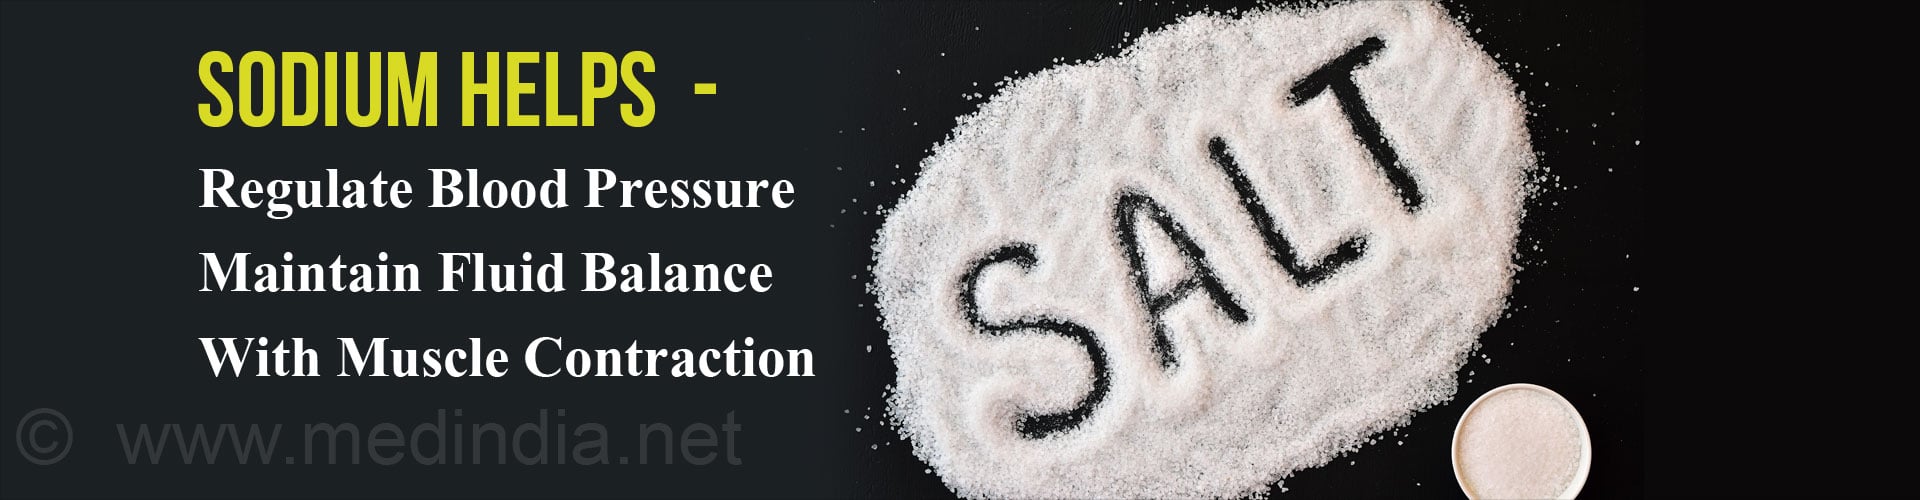 Sodium Helps
- Regulate Blood Pressure
- Maintain Pluid Balance with Muscle Contraction
